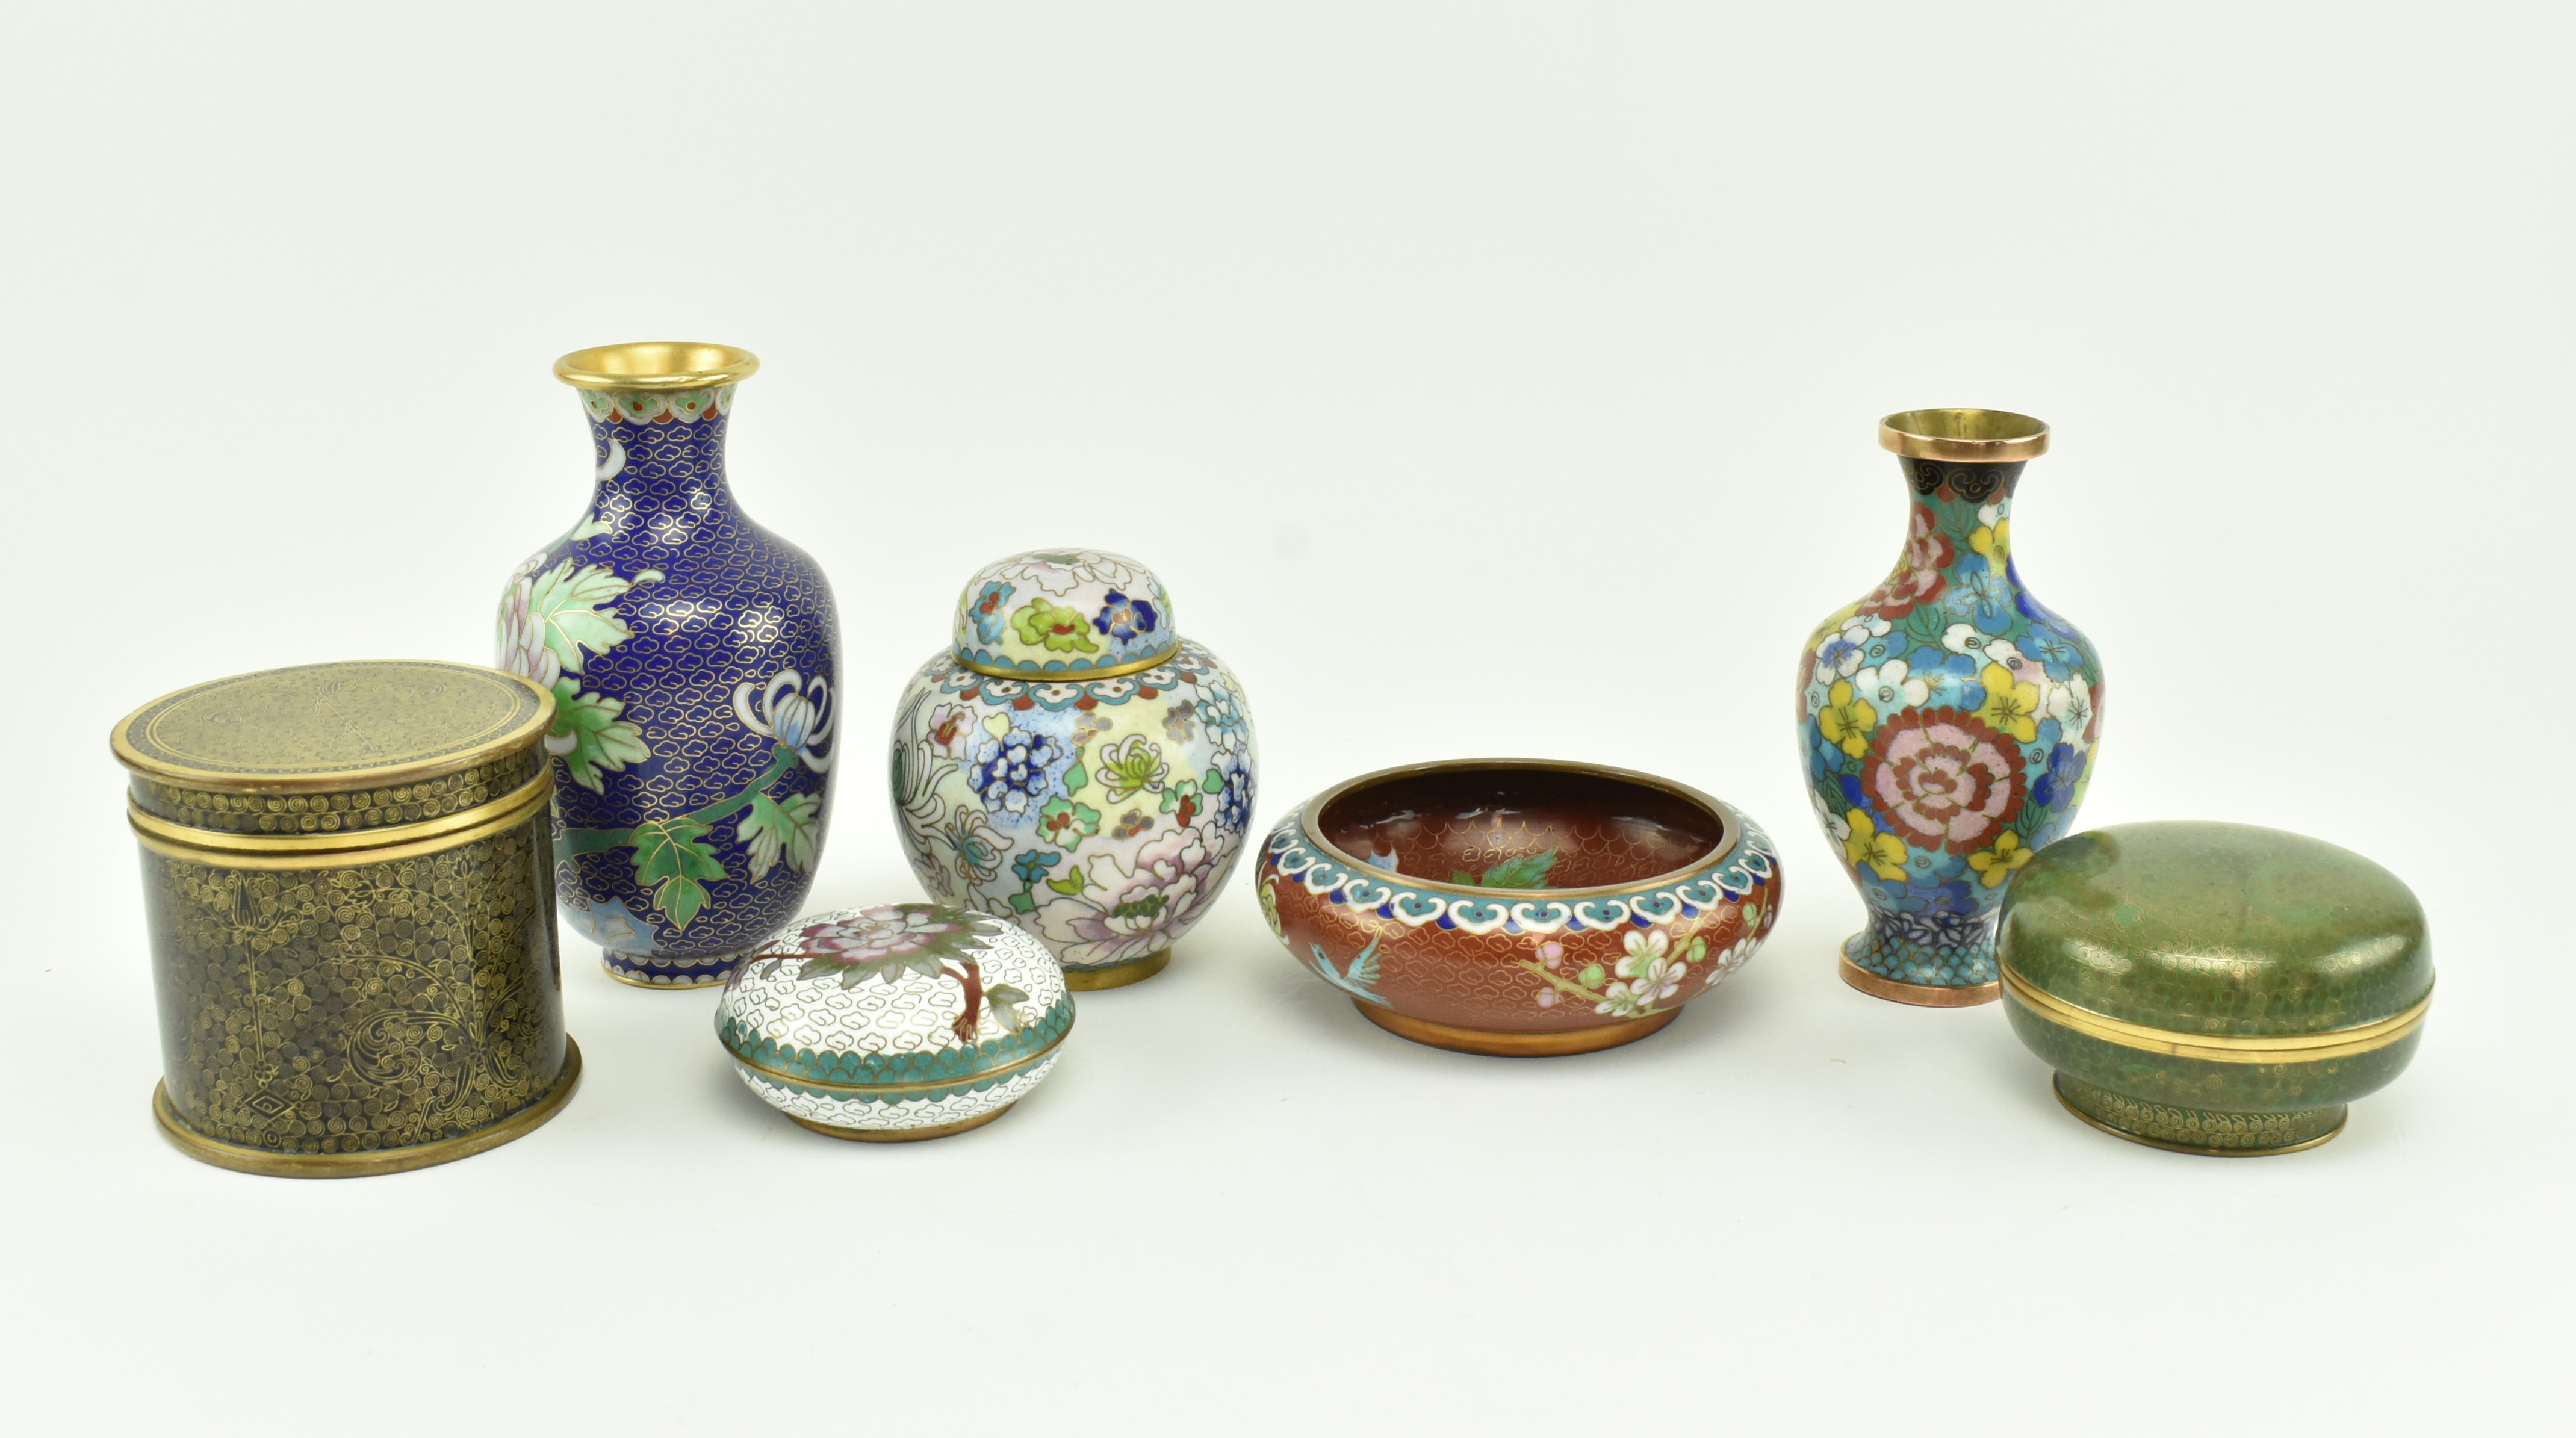 GROUP OF SEVEN CHINESE CLOISONNE VASES, JAR, CADDY AND BOXES